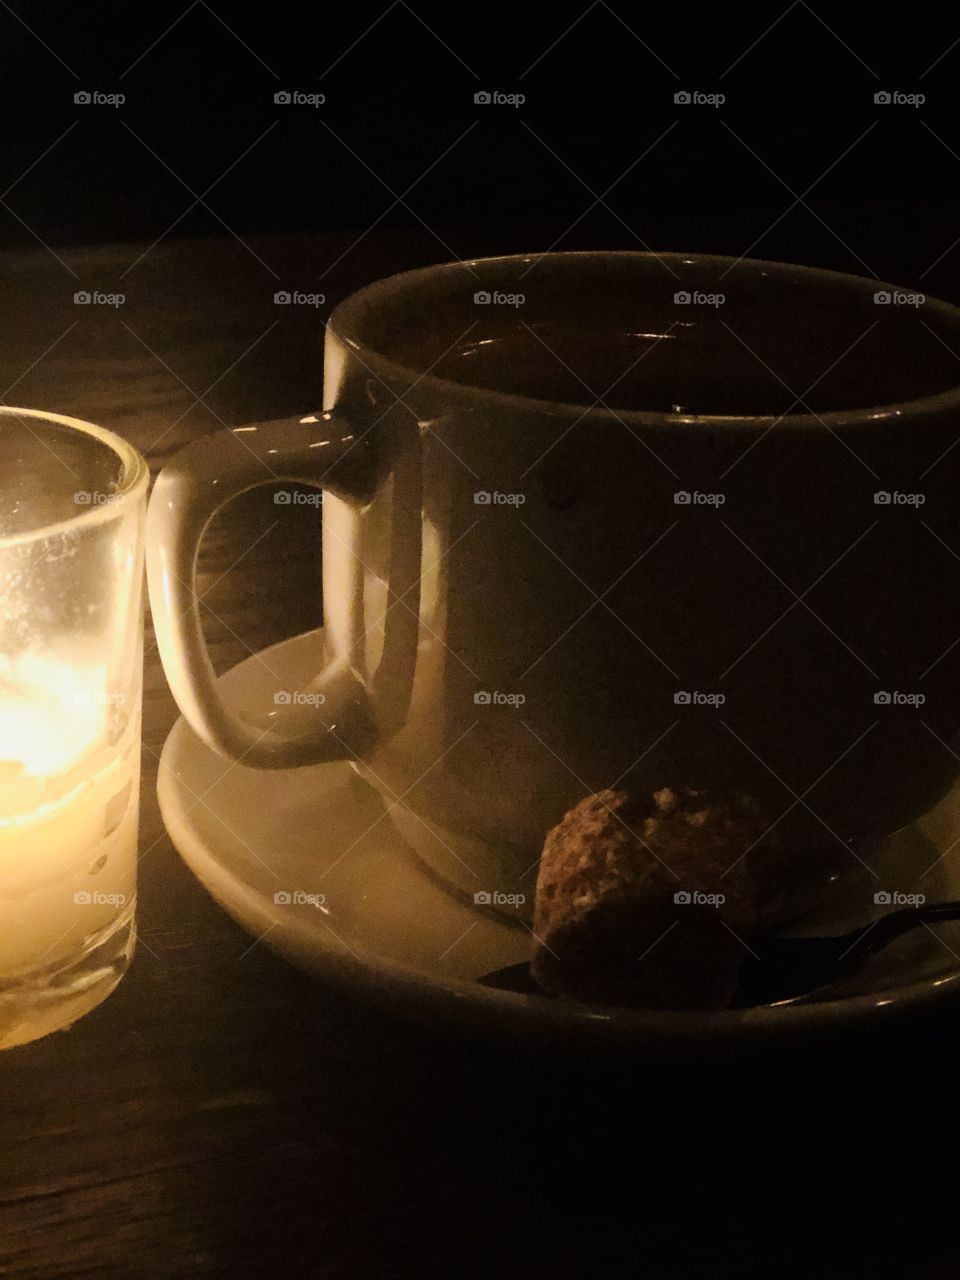 Coffee at a restaurant on a wooden table next to candle light 